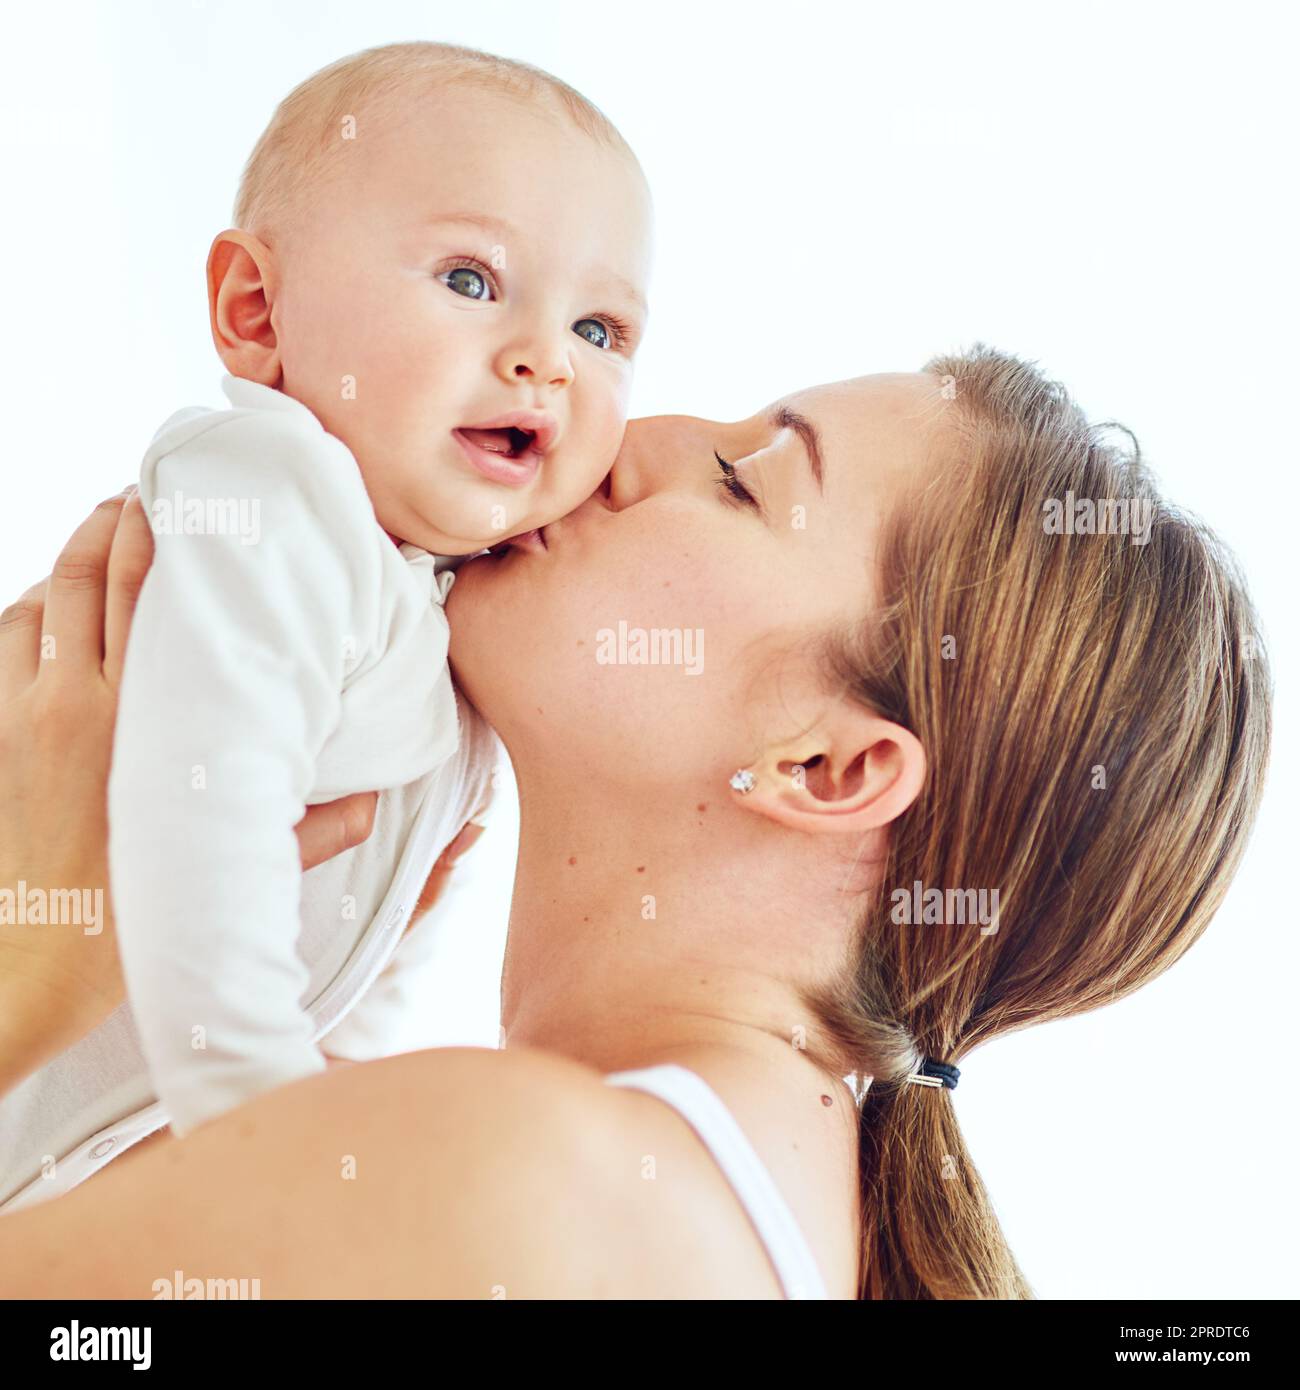 Loving, caring and affectionate mother kissing and bonding with her baby. Female embracing motherhood holding her baby in the air enjoying a sweet moment of love, care and happiness Stock Photo